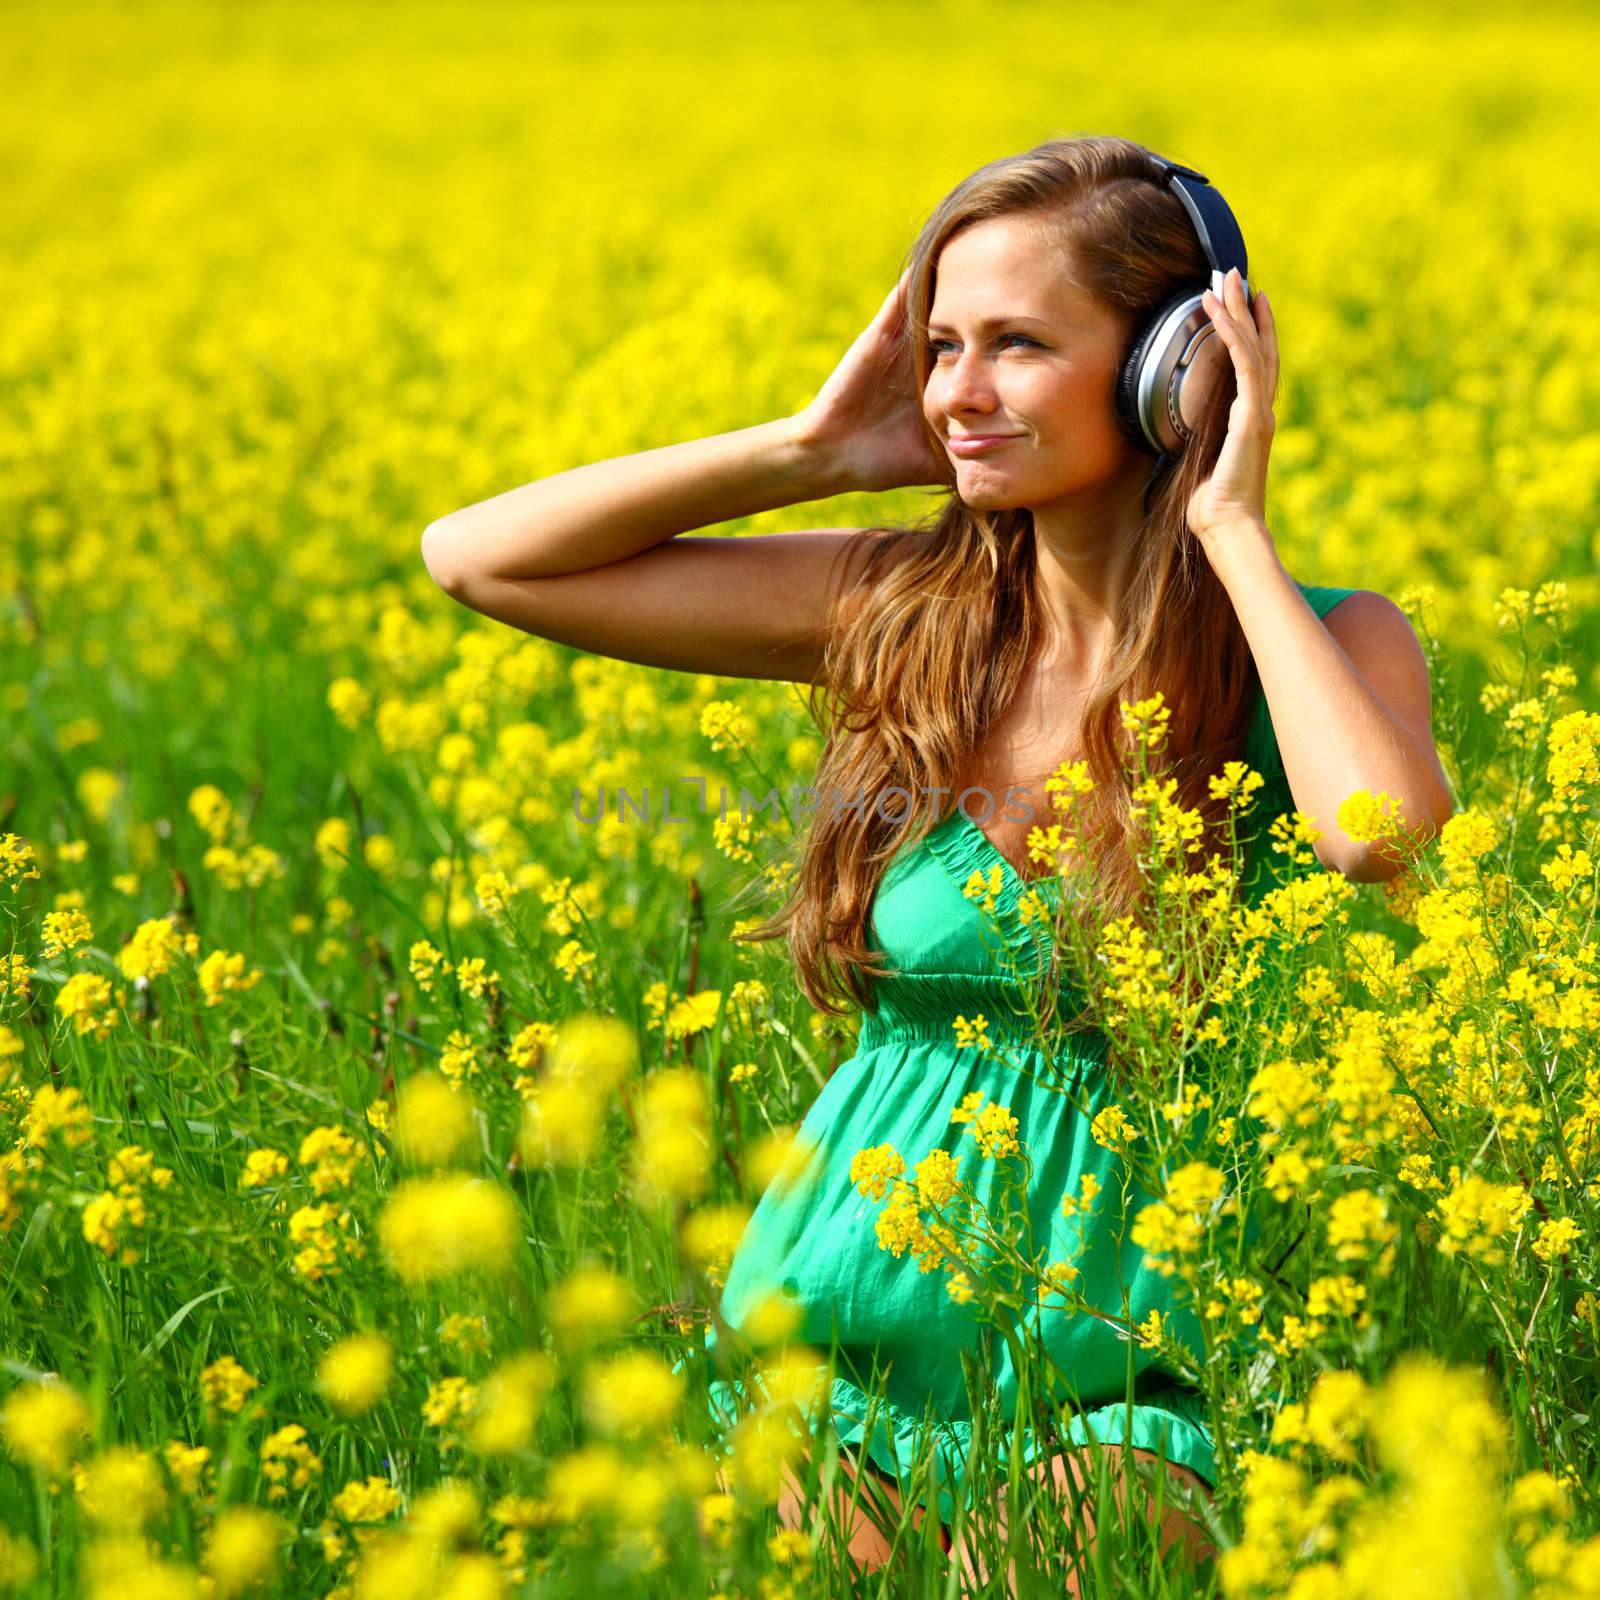  Young woman with headphones listening to music on oilseed flowering field